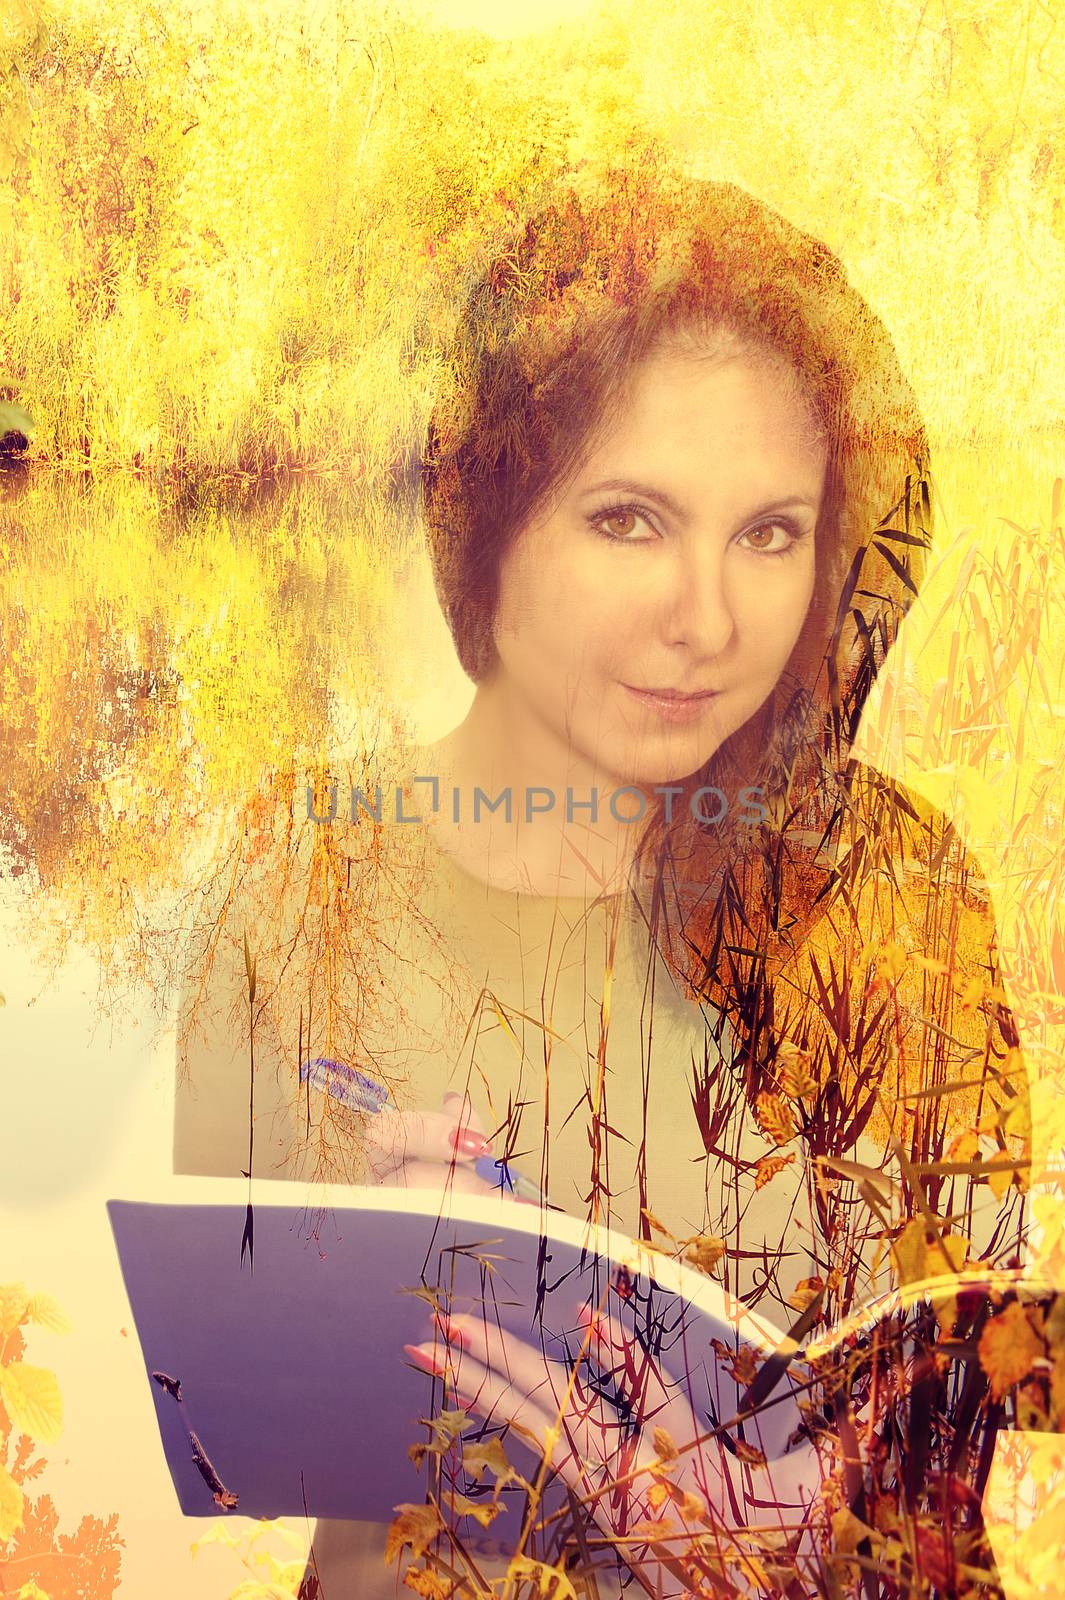 Beautiful girl with a pensive look holds a book, tree branches, a double exposure.